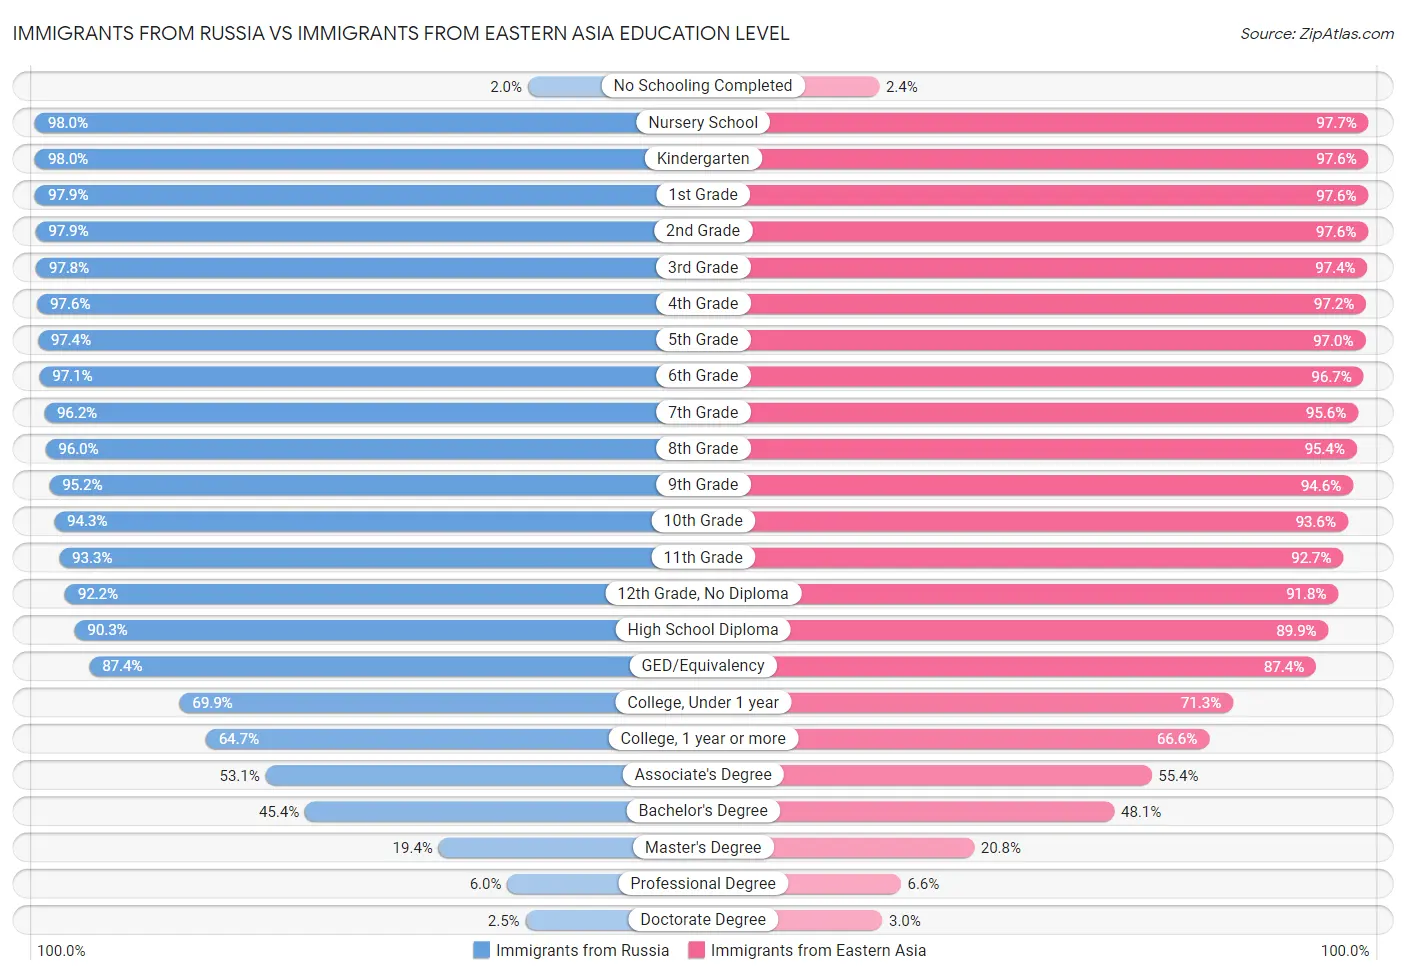 Immigrants from Russia vs Immigrants from Eastern Asia Education Level